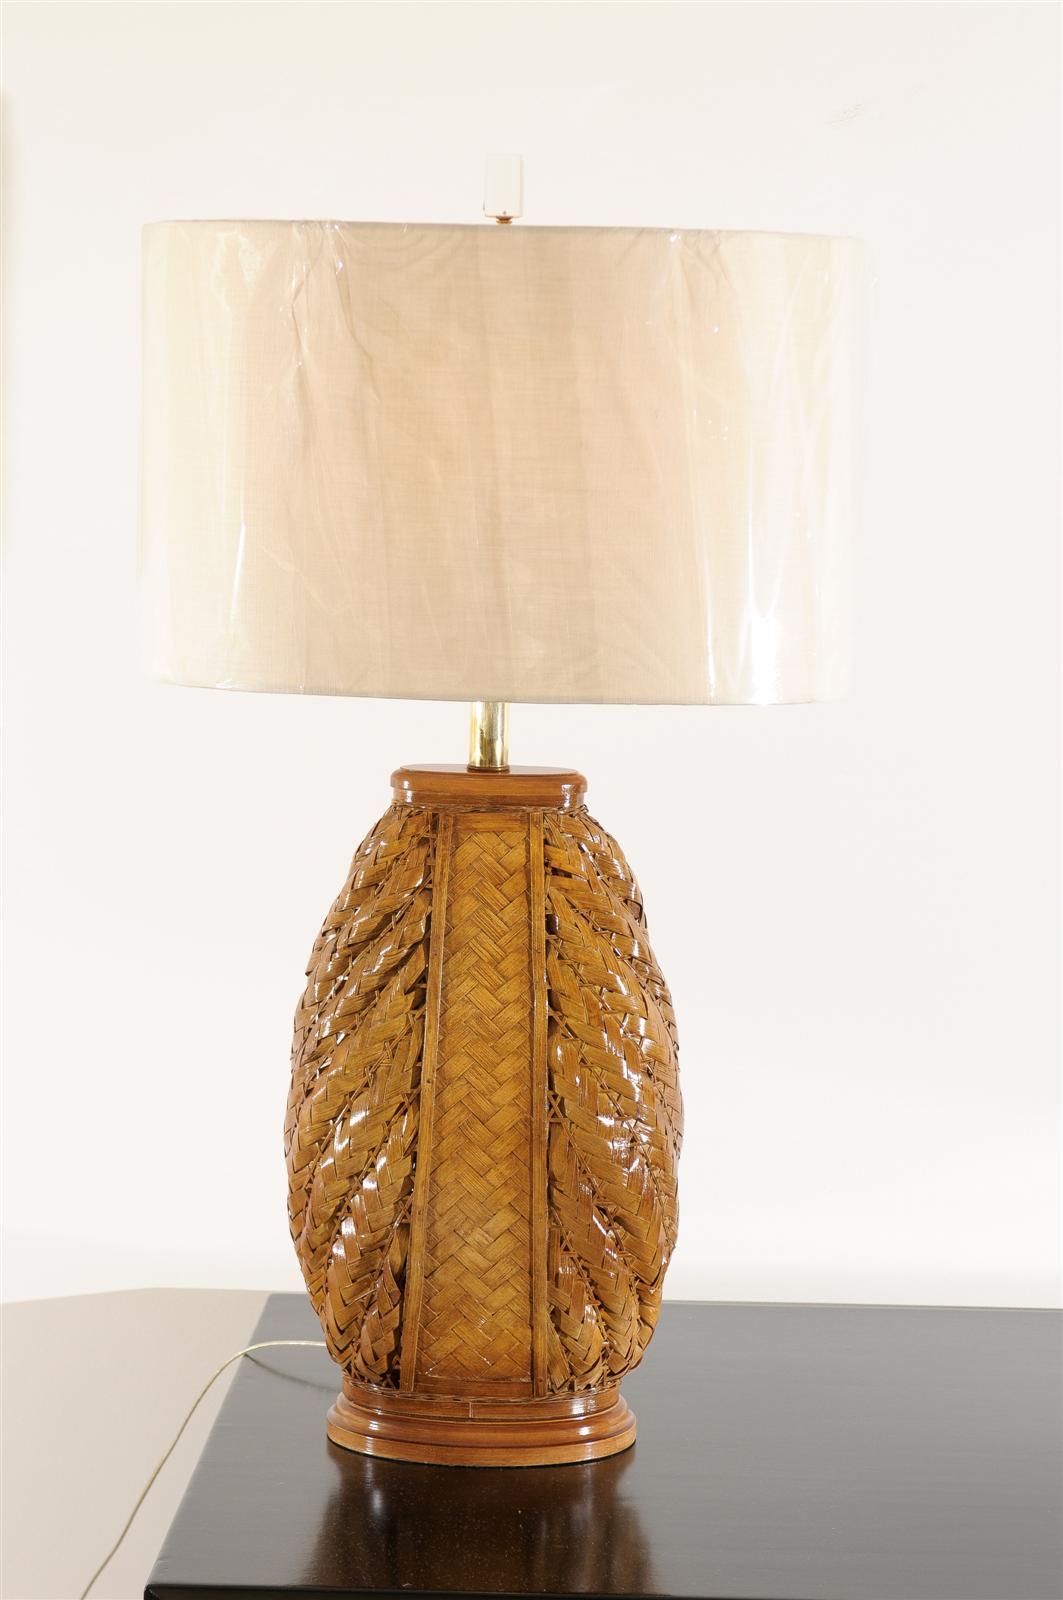 An exceptional pair of vintage rattan lamps, circa 1970.  Beautiful scale and presence.  The pieces have been re-lacquered and display fabulous luster, depth and patina.  Exquisite Jewelry !  Excellent Restored Condition.  Rewired using clear cord